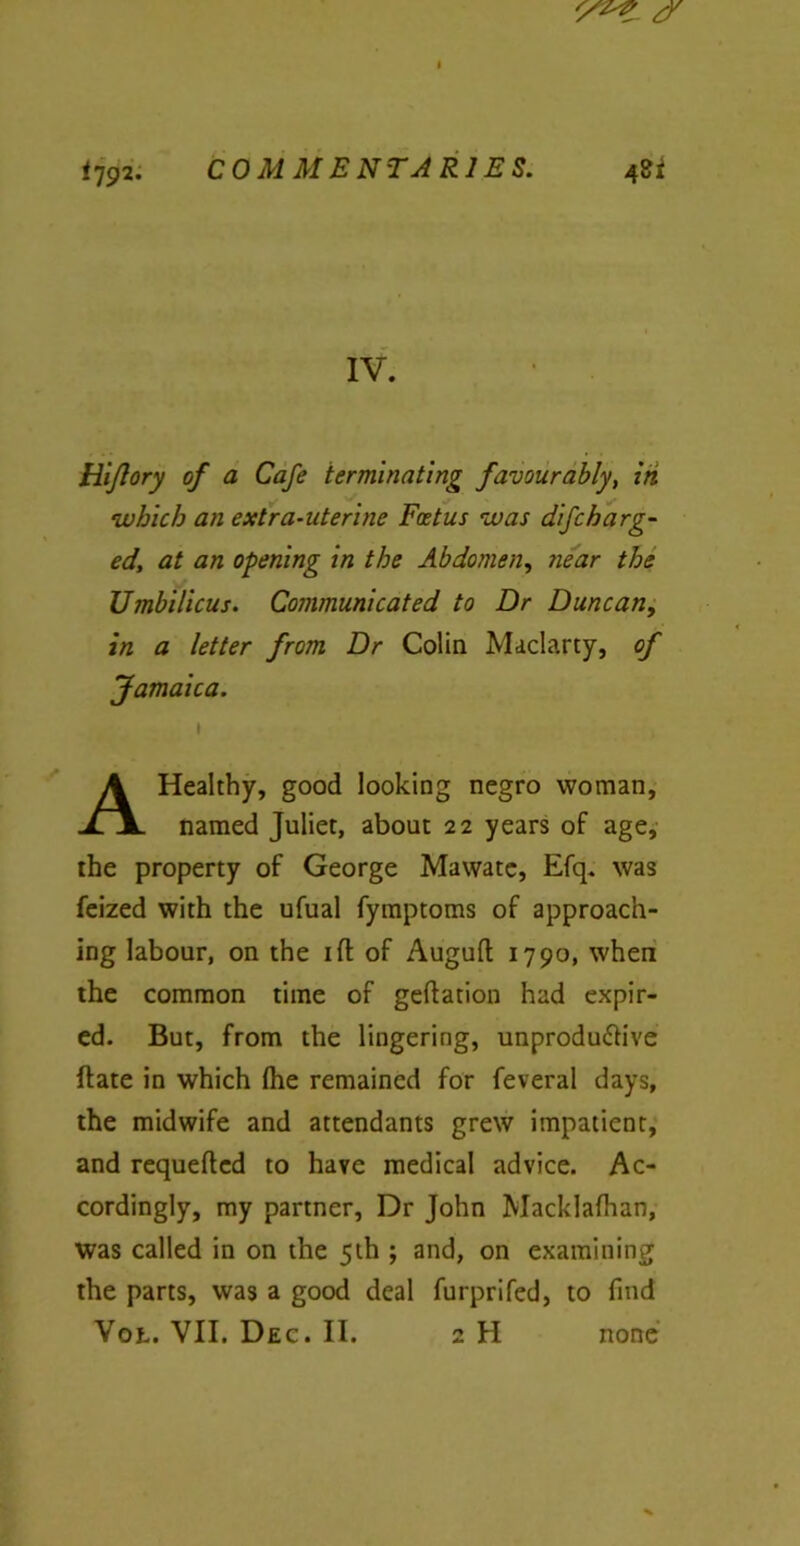 IV. Hijlory of a Cafe terminating favourably, in which an extra-uterine Foetus was difcharg- ed, at an opening in the Abdomen, near the Umbilicus. Communicated to Dr Duncan, in a letter from Dr Colin Maclarty, of Jamaica. \ A Healthy, good looking negro woman, named Juliet, about 22 years of age, the property of George Mawate, Efq. was feized with the ufual fymptoms of approach- ing labour, on the iff of Auguft 1790, when the common time of geftation had expir- ed. But, from the lingering, unproductive (late in which (he remained for feveral days, the midwife and attendants grew impatient, and requeued to have medical advice. Ac- cordingly, my partner, Dr John Macklafhan, was called in on the 5th ; and, on examining the parts, was a good deal furprifed, to find Vot. VII. Dec. II. 2 H none